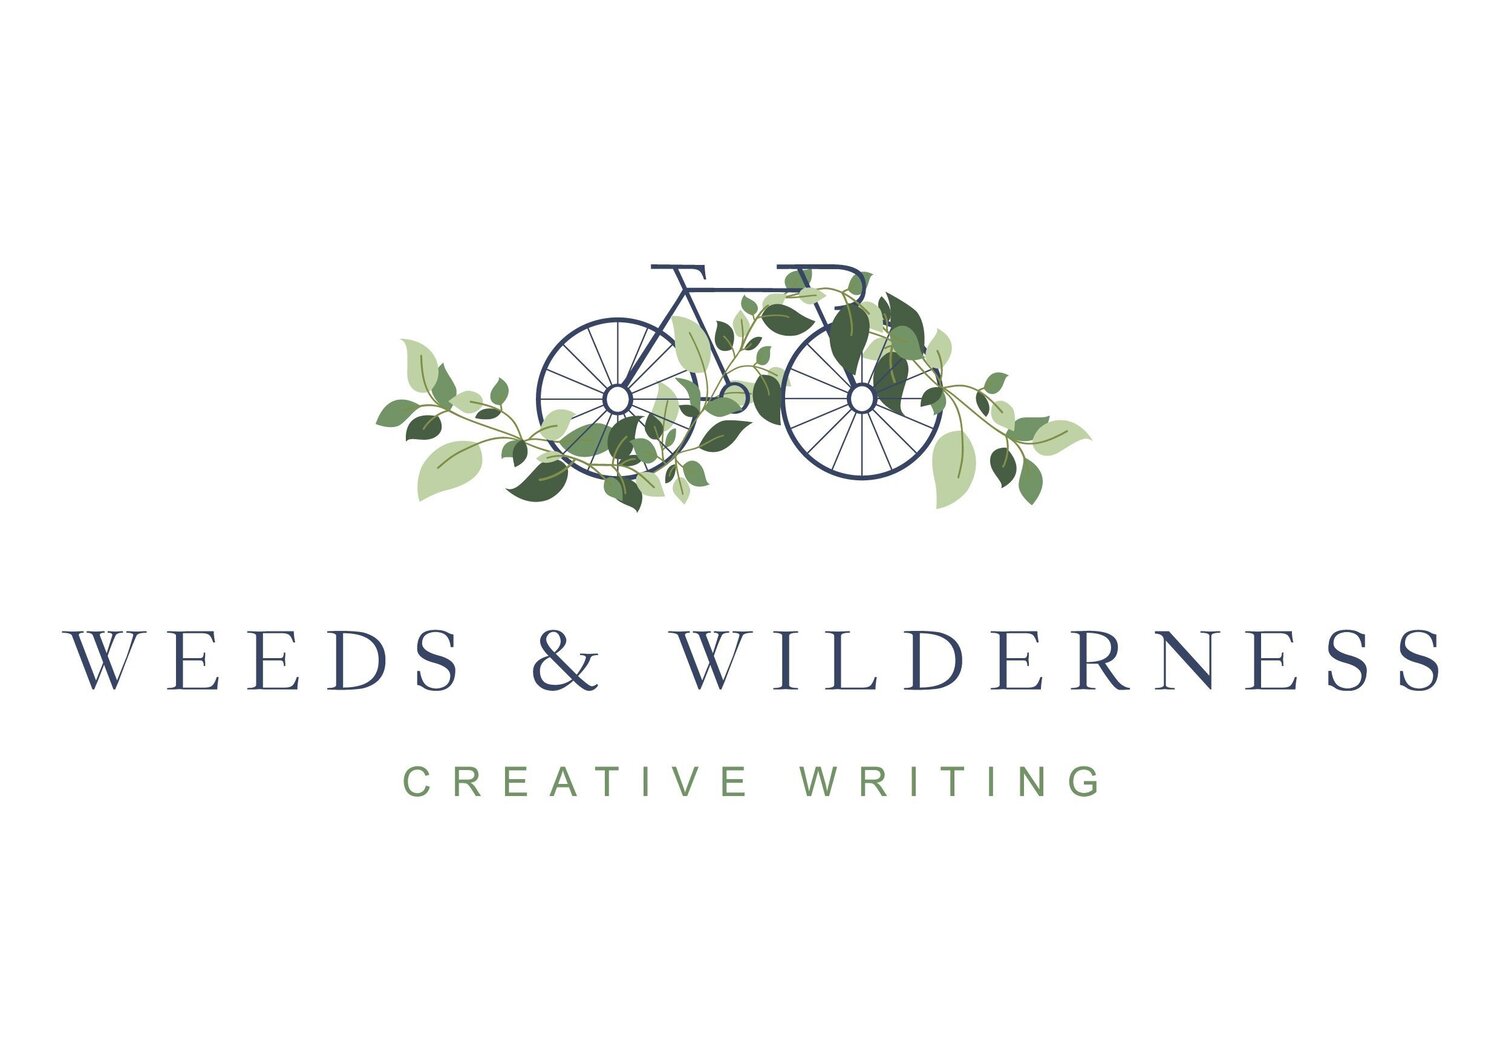 Weeds and Wilderness Creative Writing